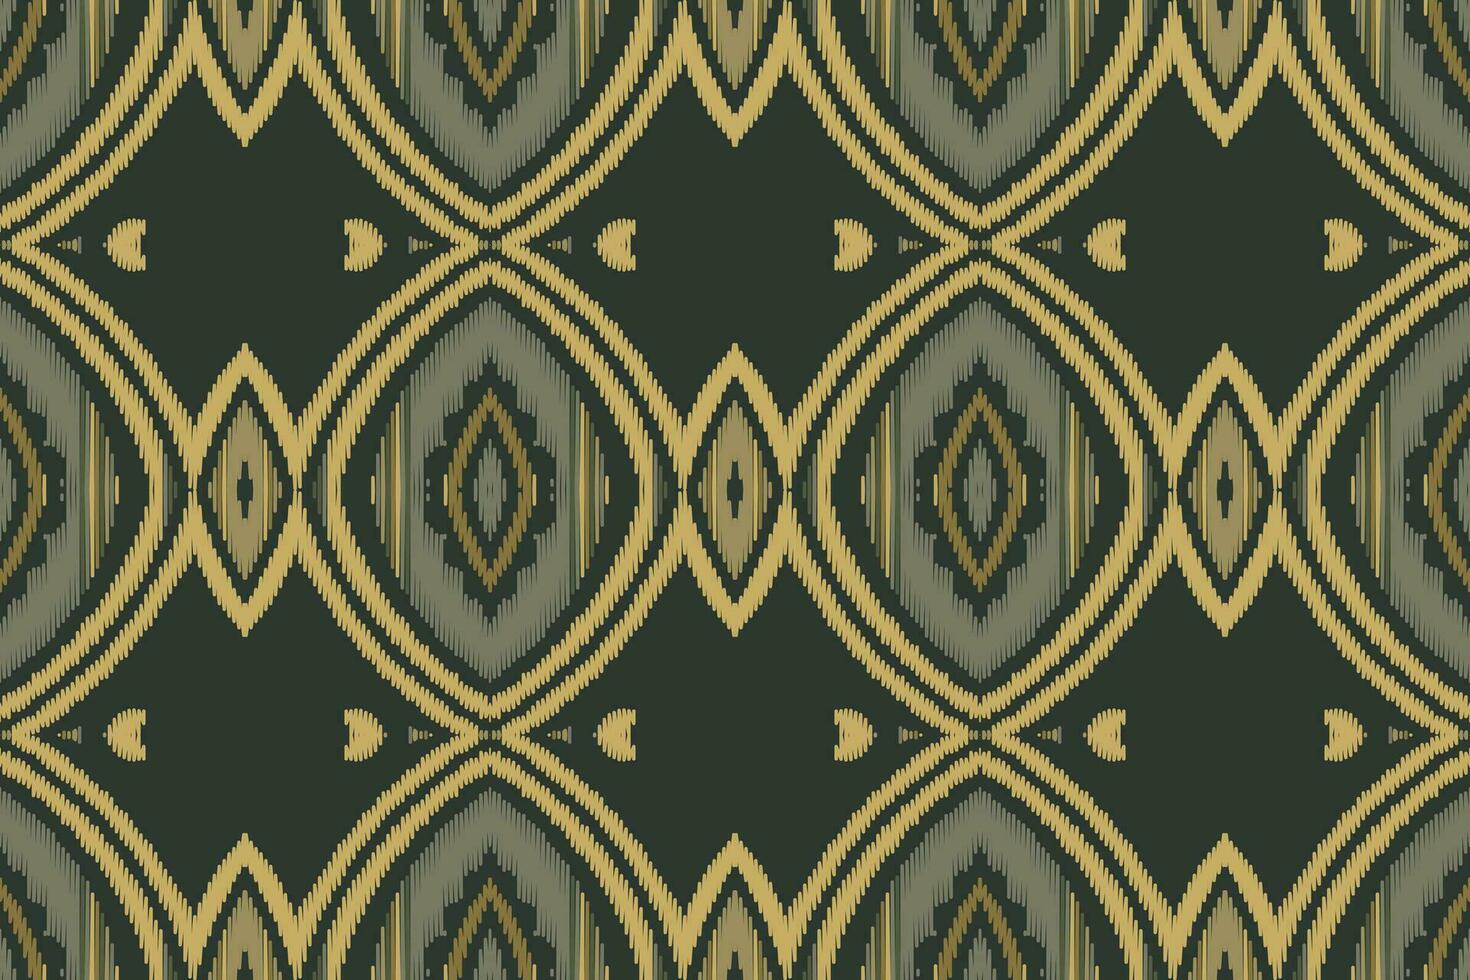 Ikat Damask Paisley Embroidery Background. Ikat Designs Geometric Ethnic Oriental Pattern traditional.aztec Style Abstract Vector illustration.design for Texture,fabric,clothing,wrapping,sarong.